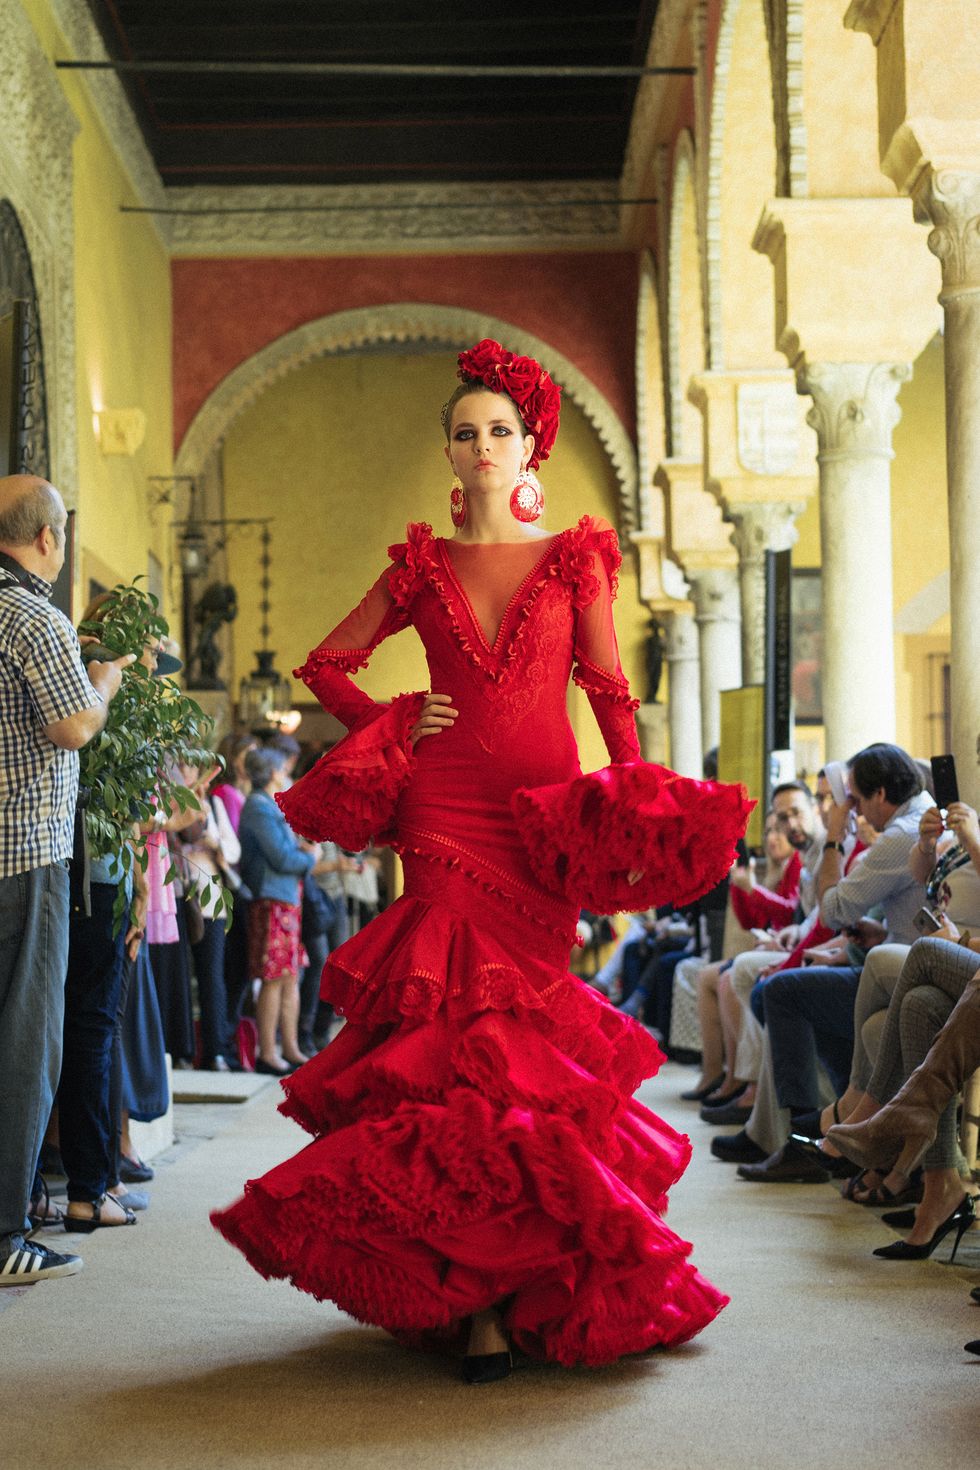 Red, Dance, Flamenco, Fashion, Event, Tradition, Dress, Performing arts, Haute couture, Gown, 